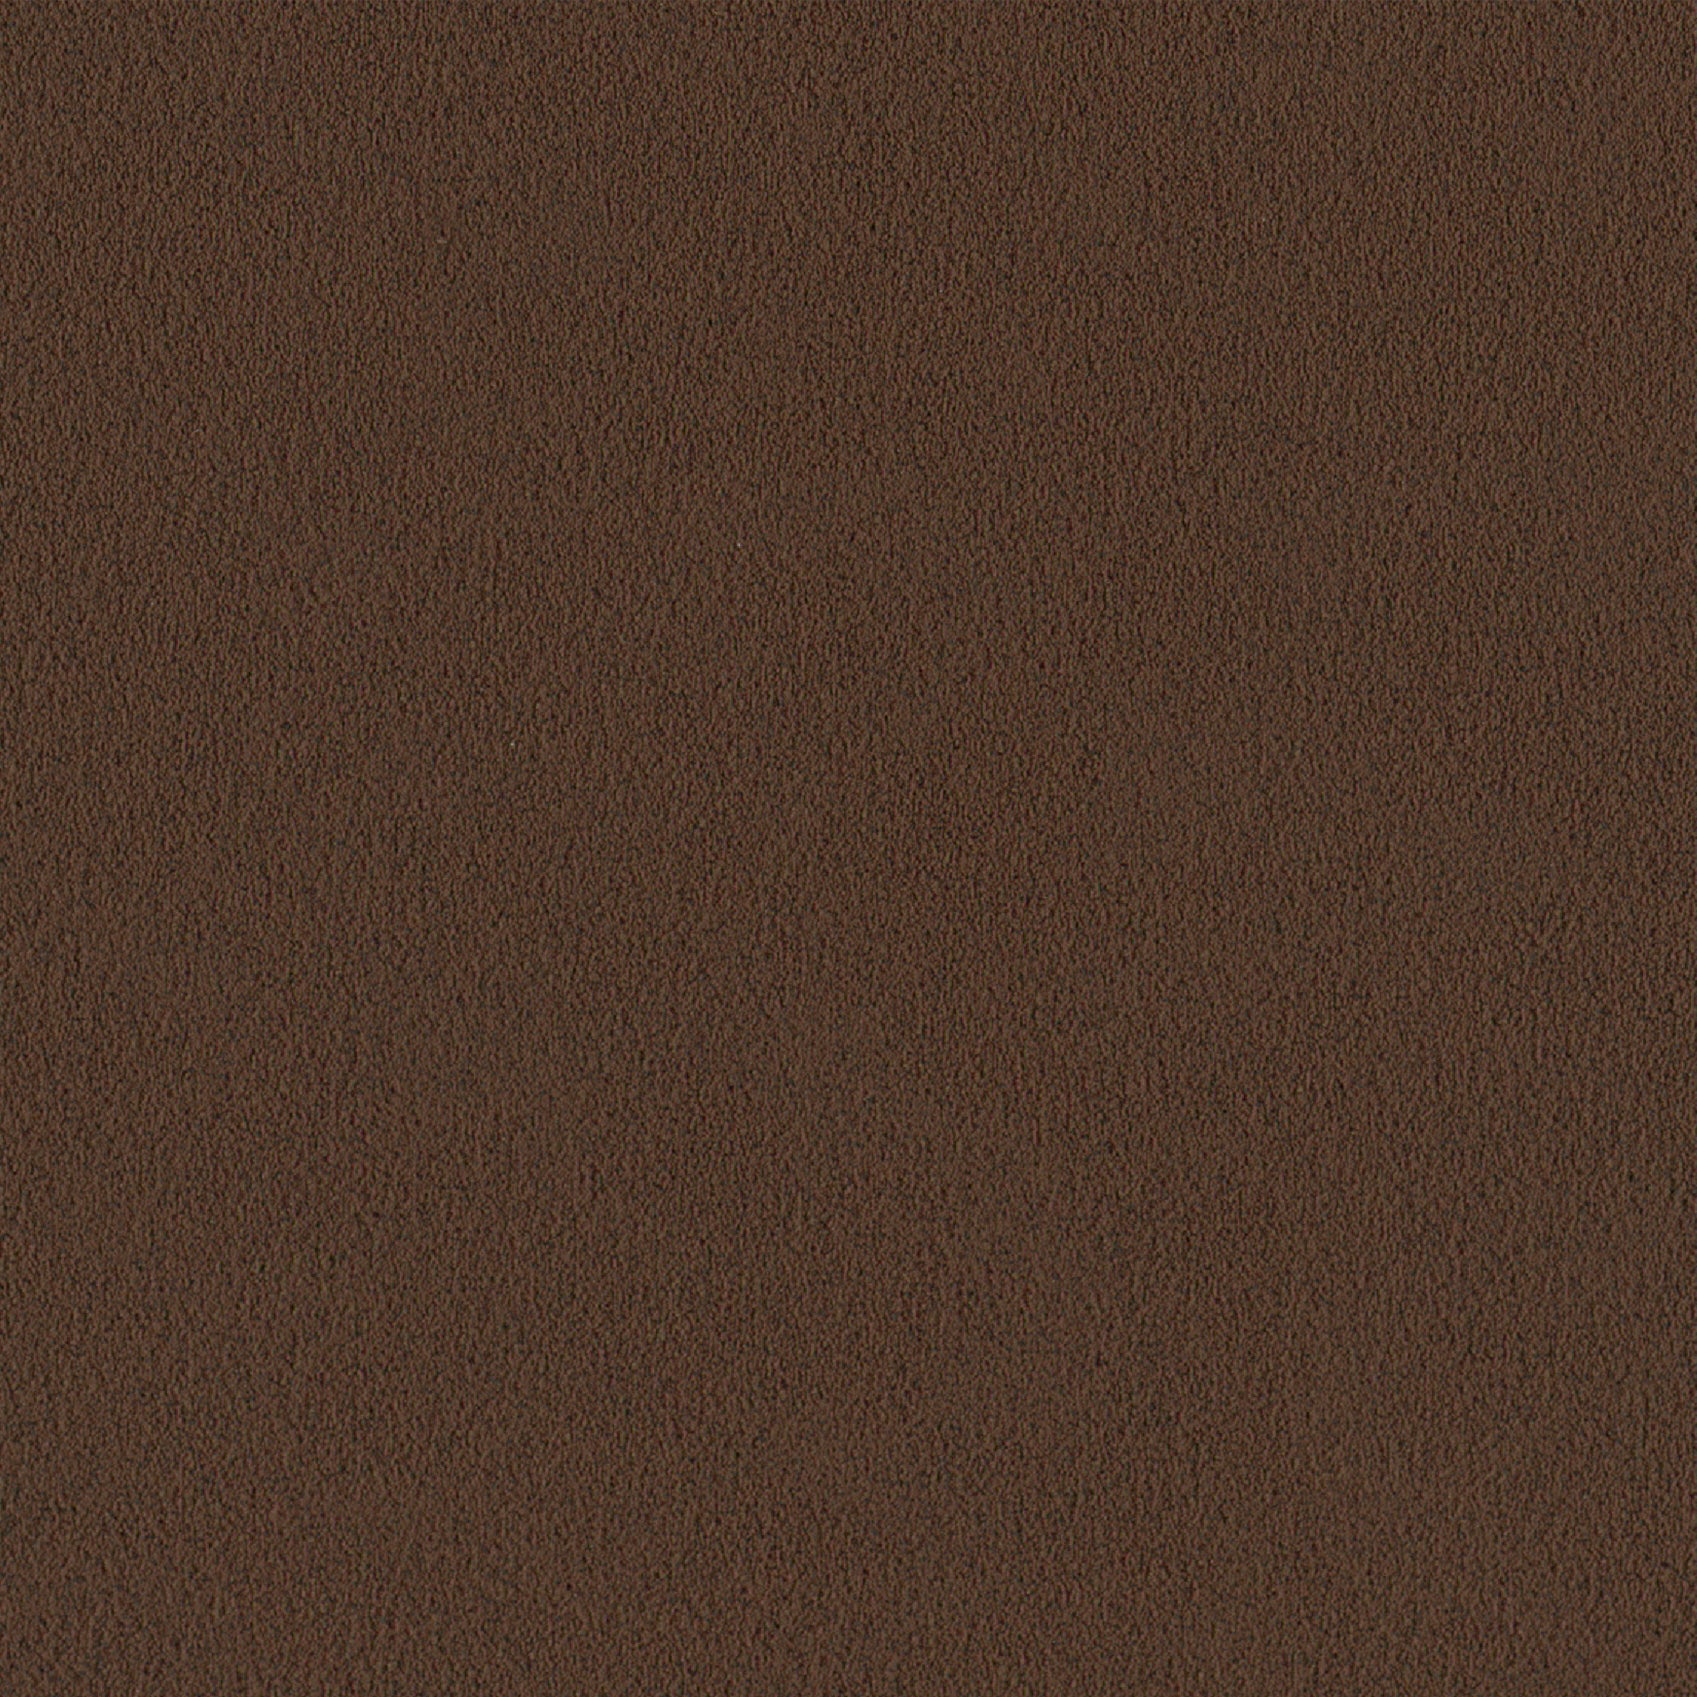 Andriali-Contract-Vinyl_Upholstery-Design-Serenity-Color-340CharBrown-Width-140cm